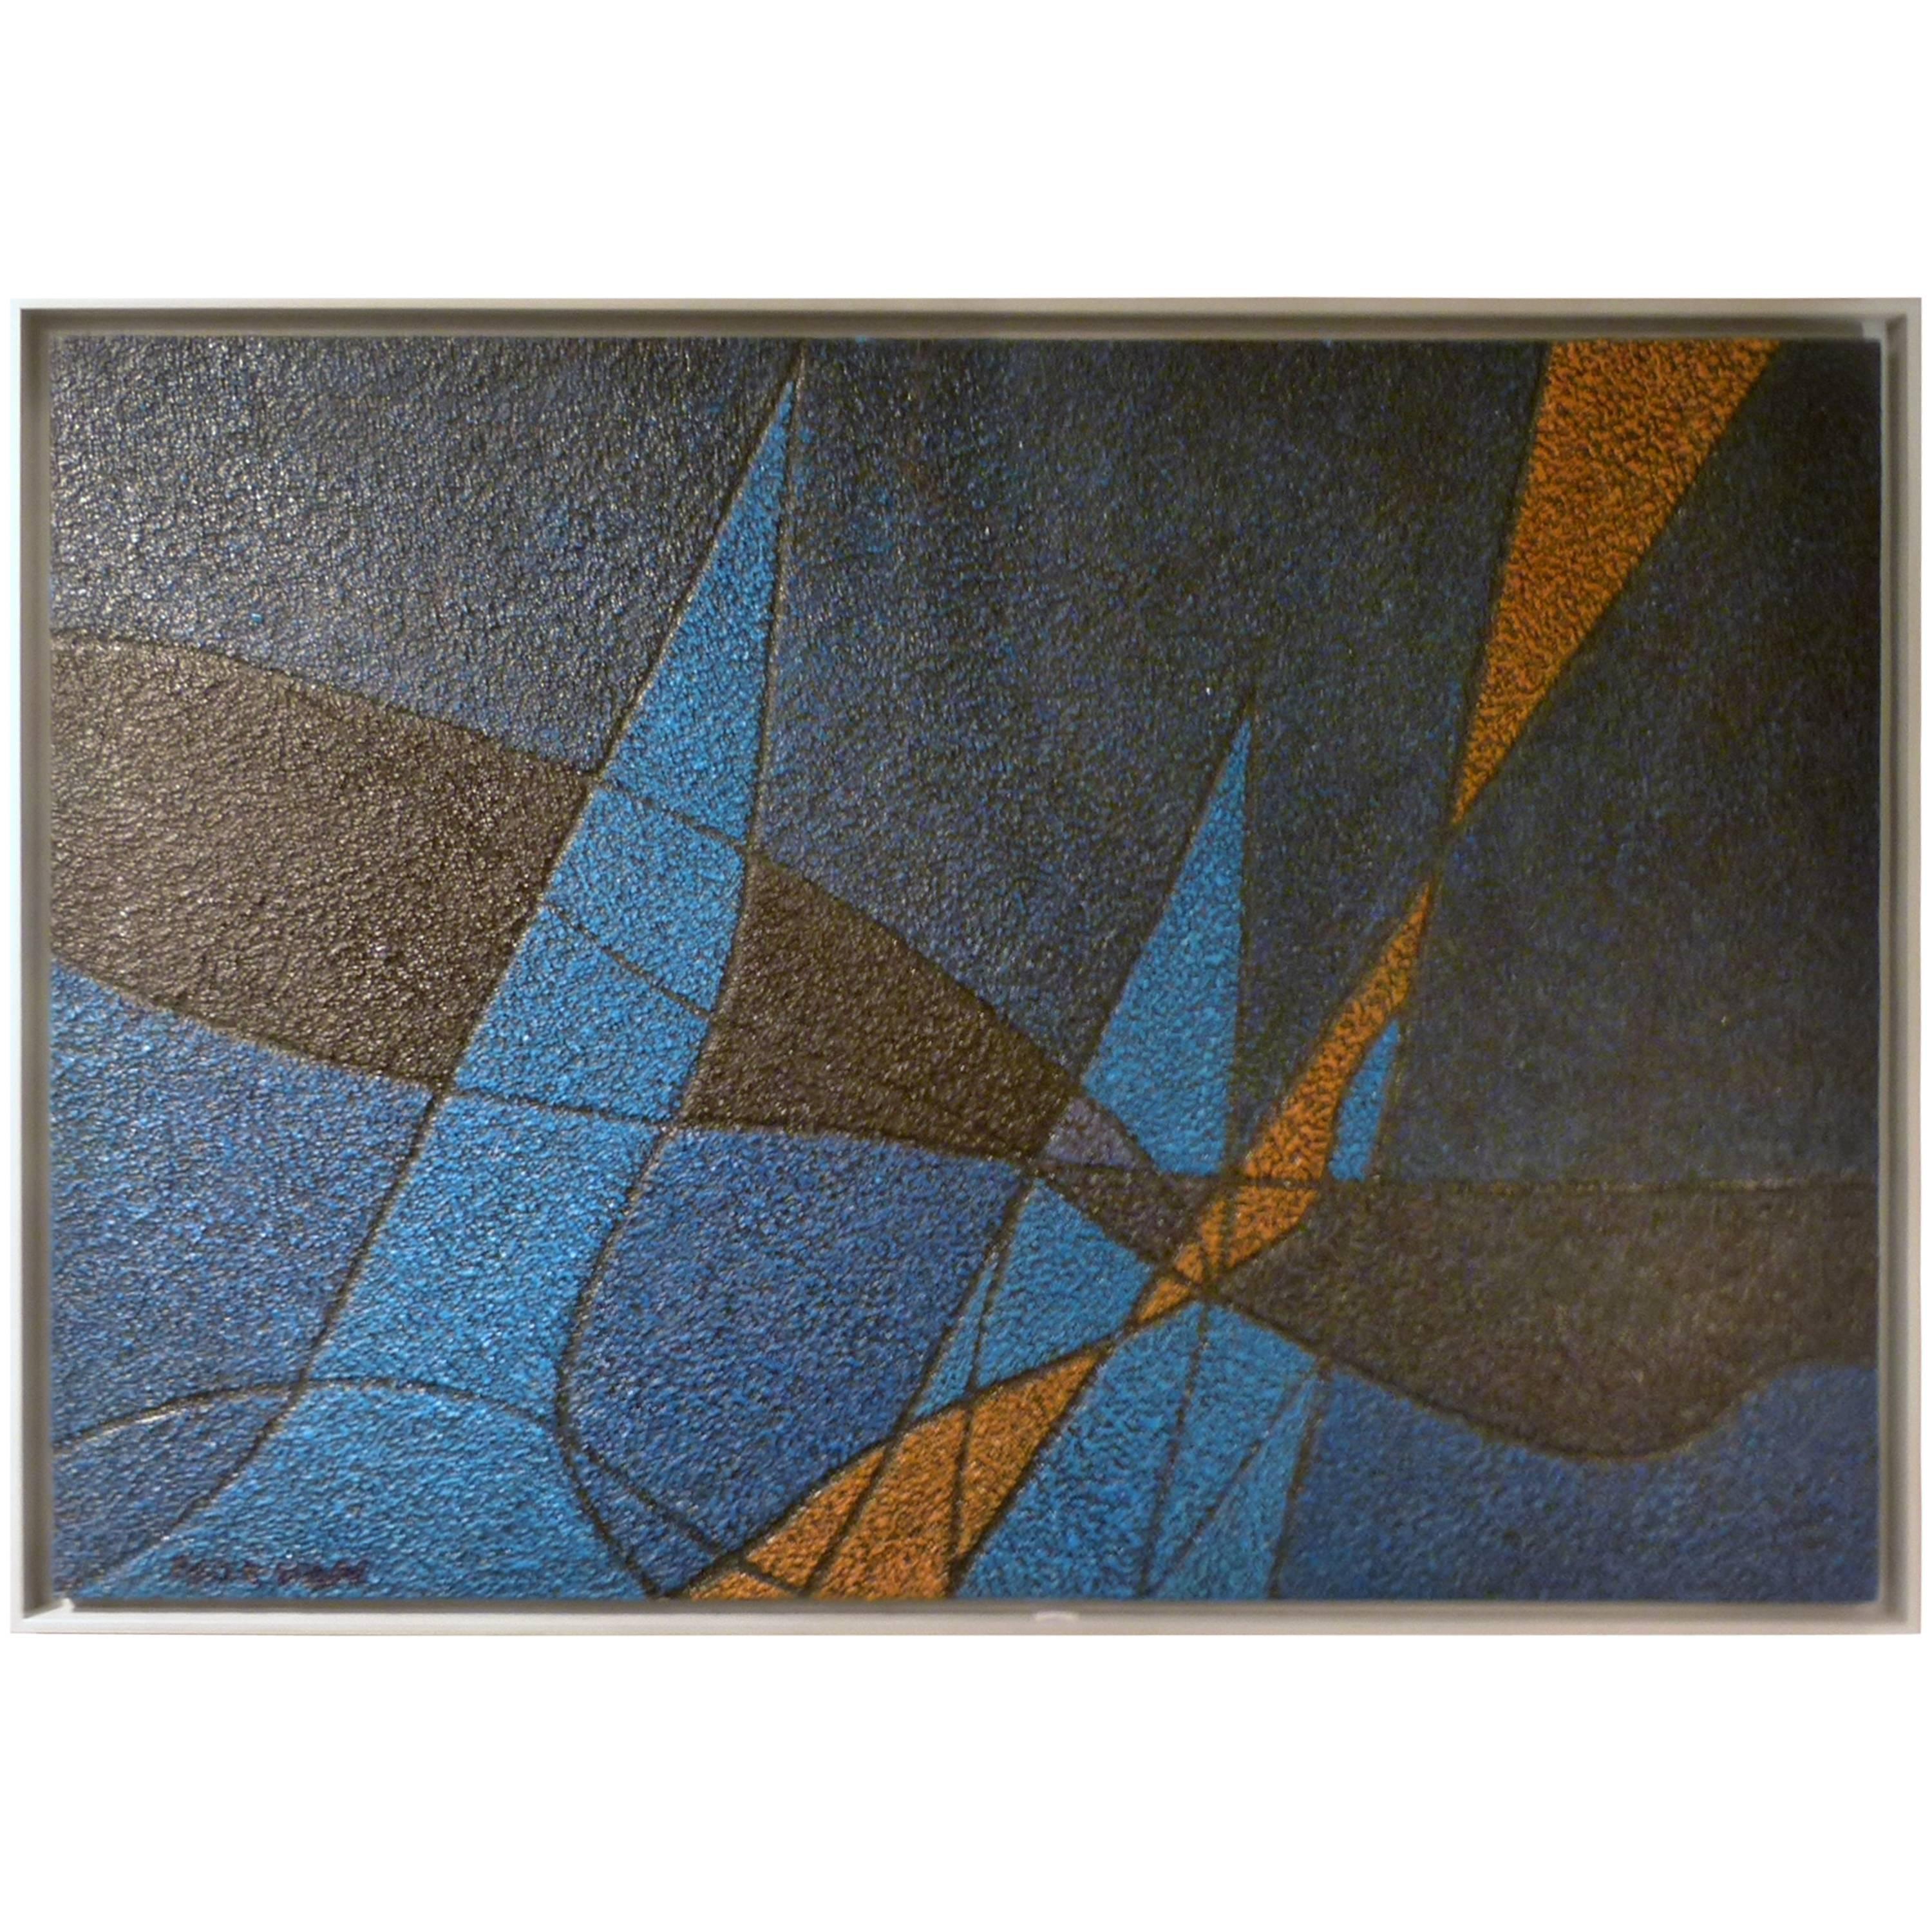 1970s Abstract Composition Painting by Yan Morvan